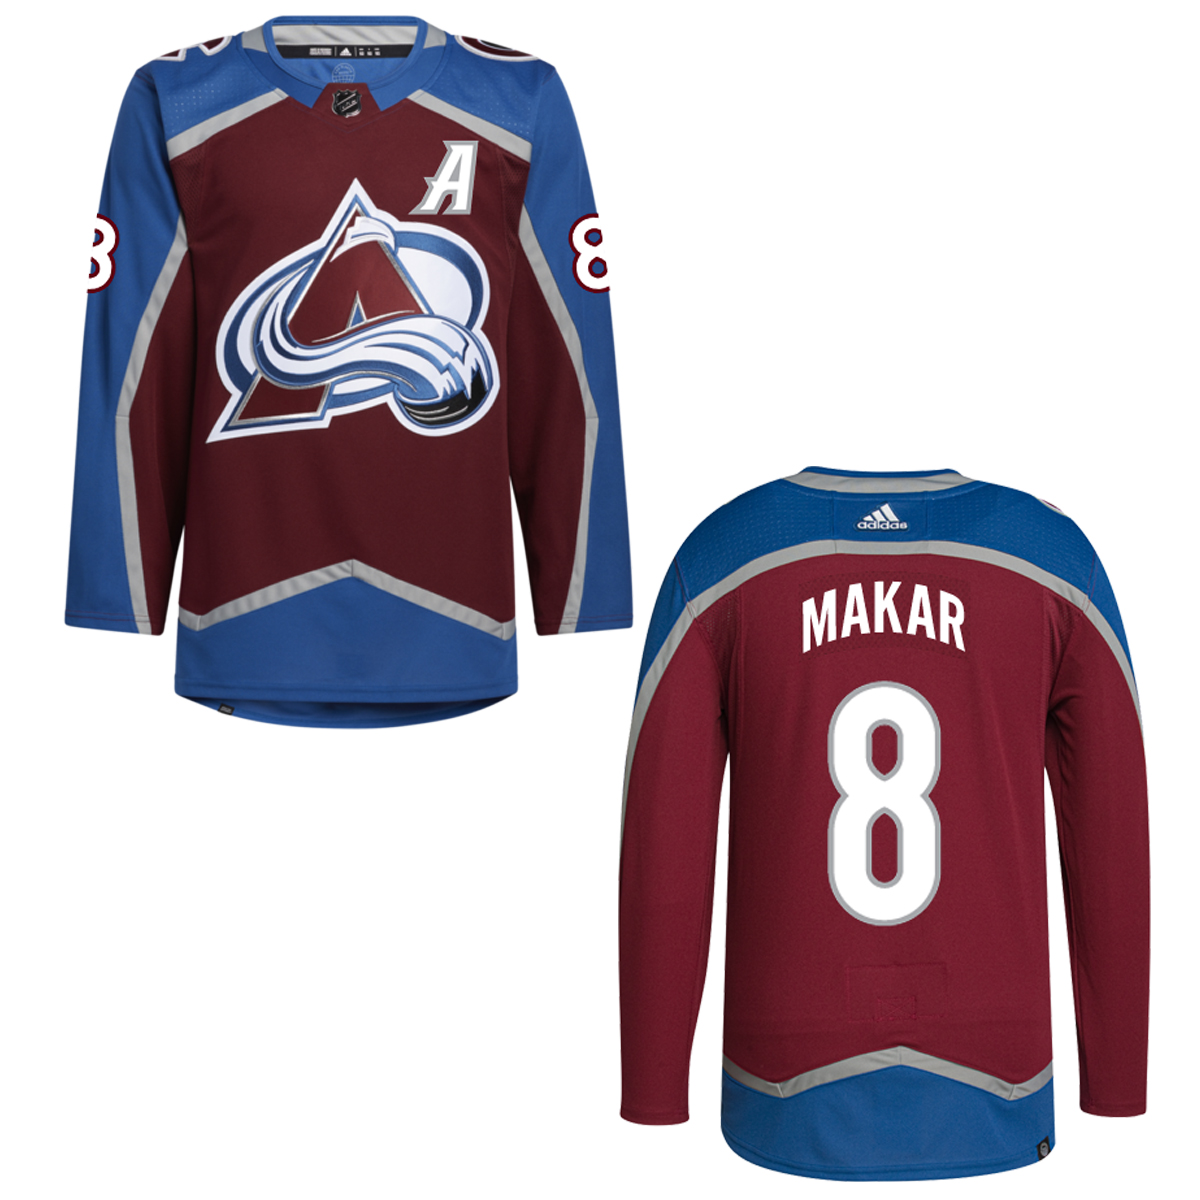 Are the Avs' Blue Jerseys Bad Luck? - 5280